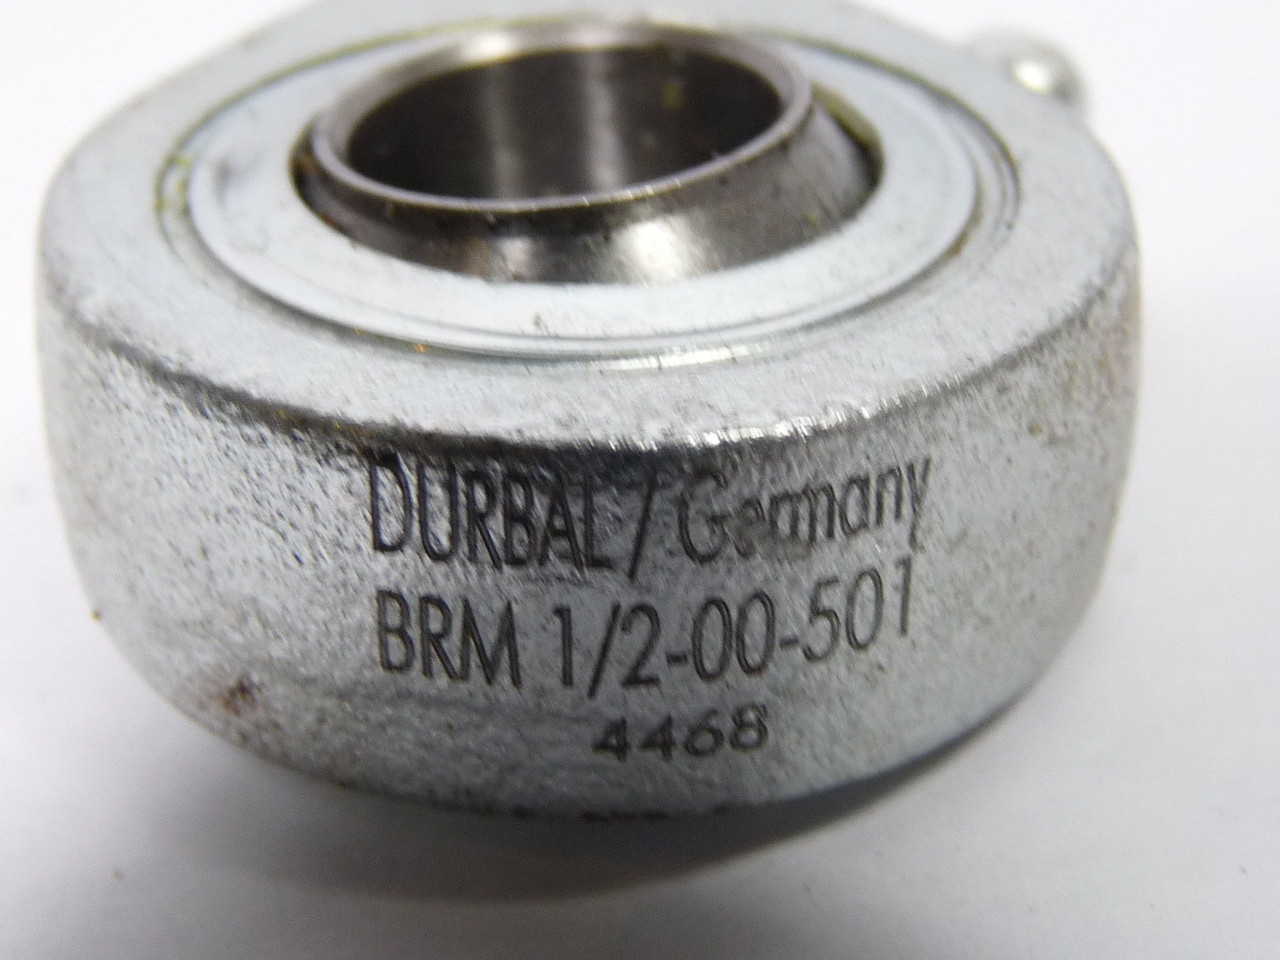 Durbal BRM1/2-00-501 Rod End Bearing 1/2" Bore x 1/2" Thread x 20 UNF USED